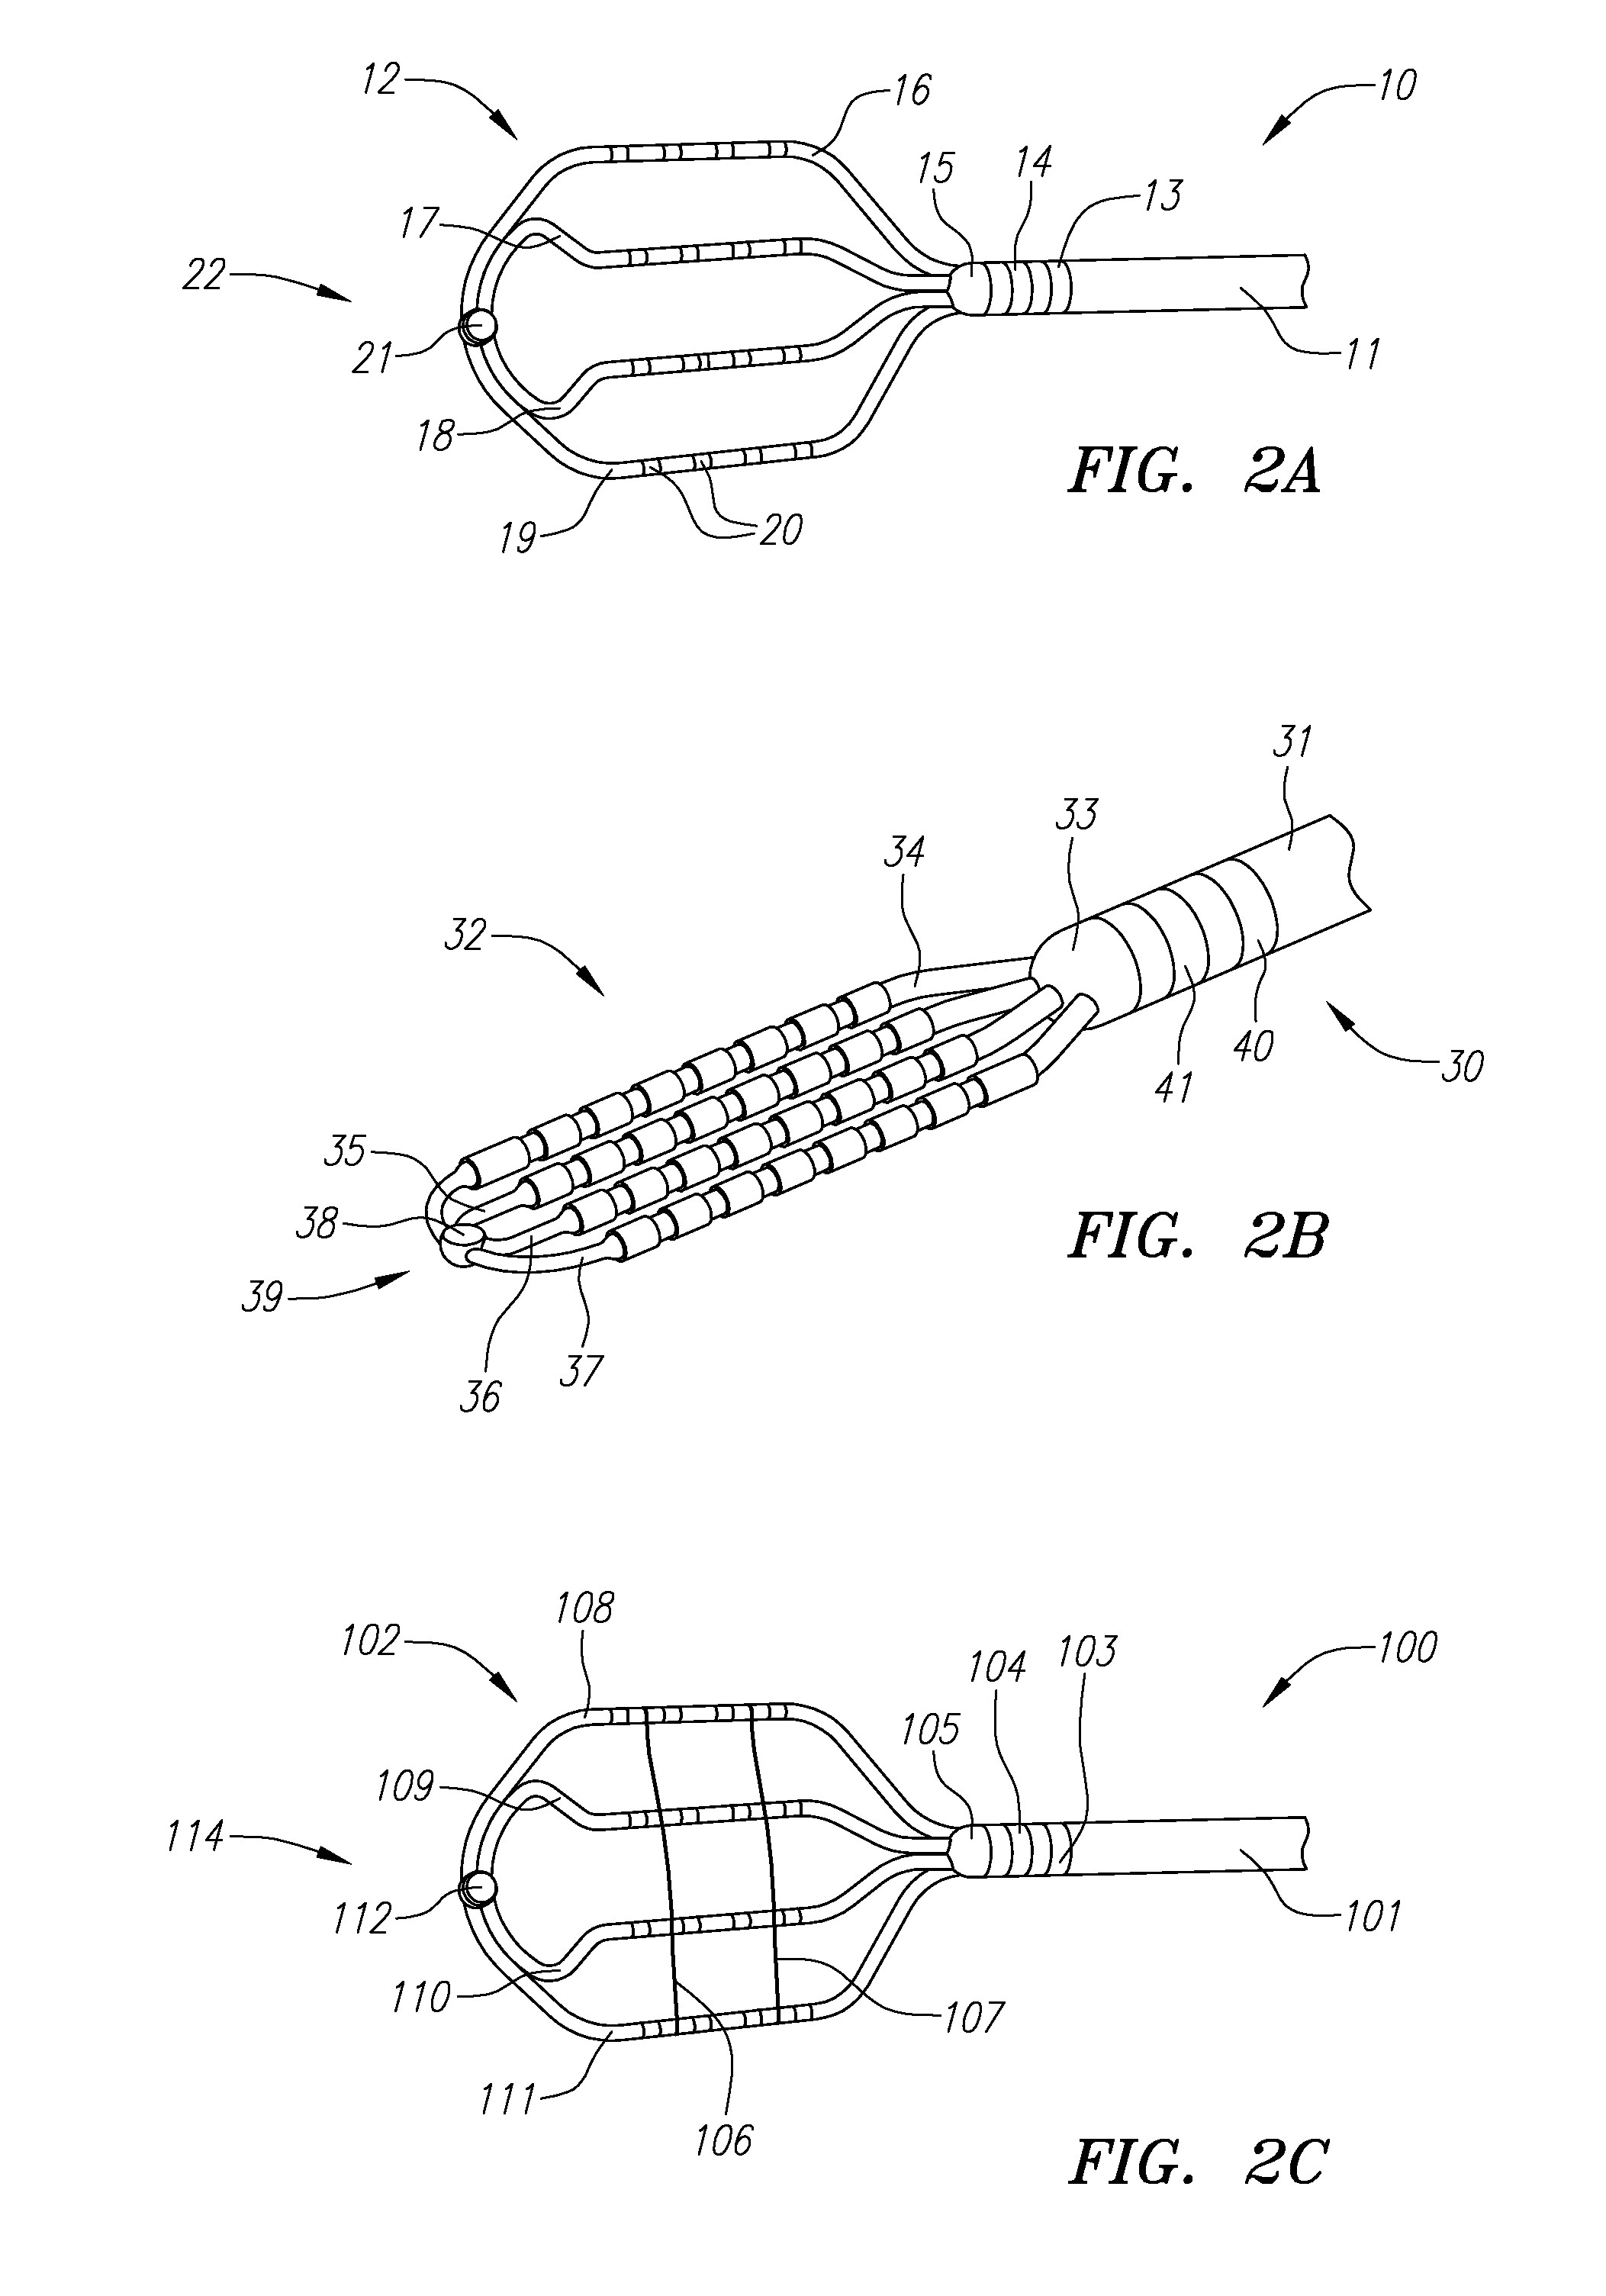 Systems and methods for using electrophysiology properties for classifying arrhythmia sources